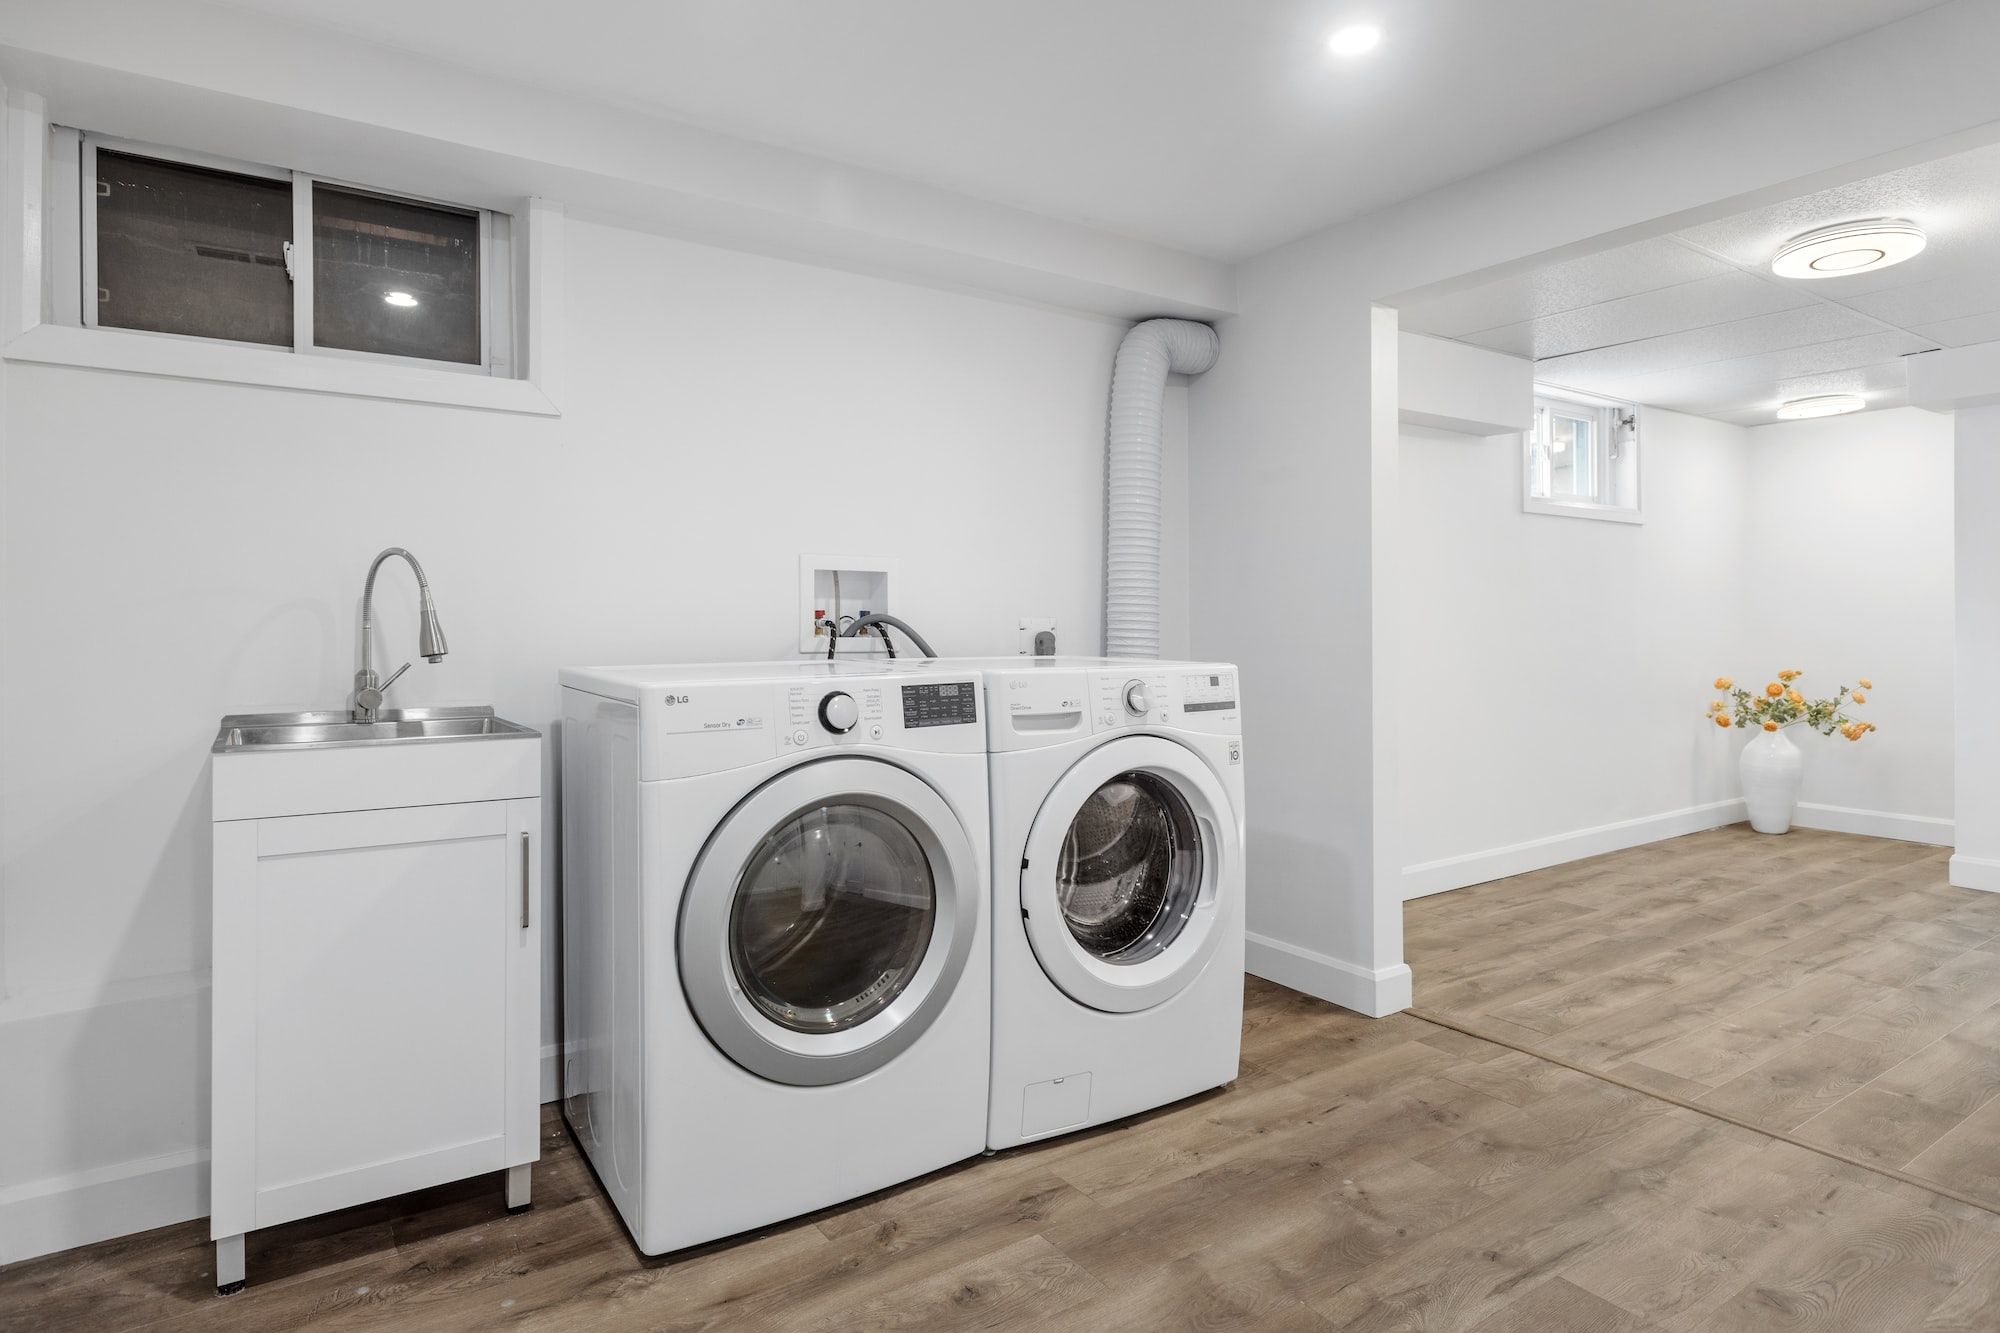 Laundry Cabinets by Mandurah Cabinets and Custom Made